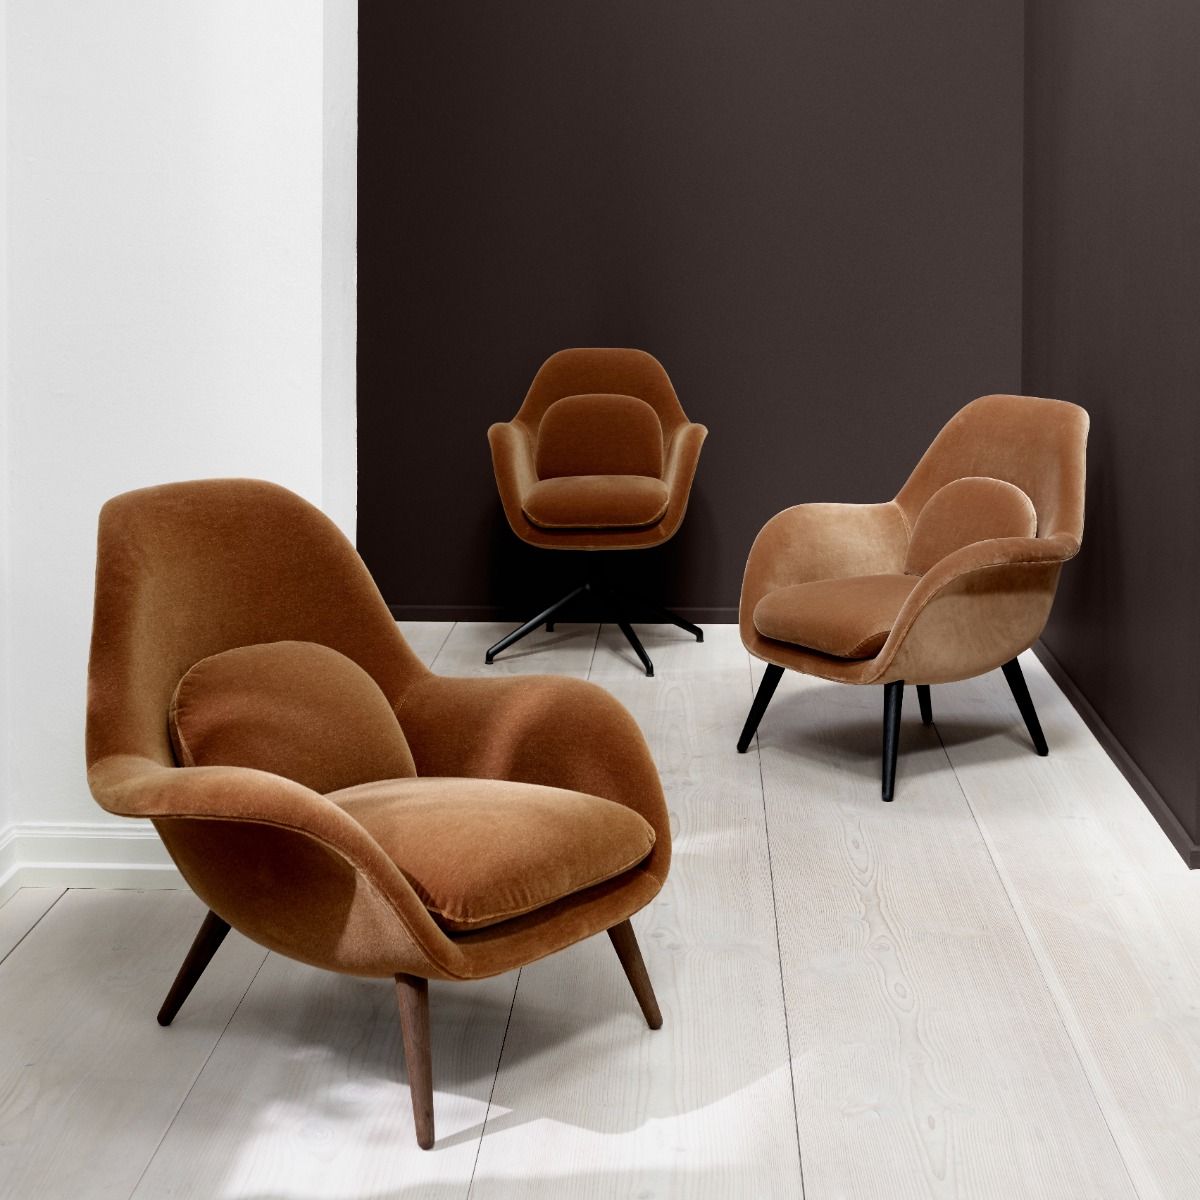 The Fredericia Swoon Lounge Chair